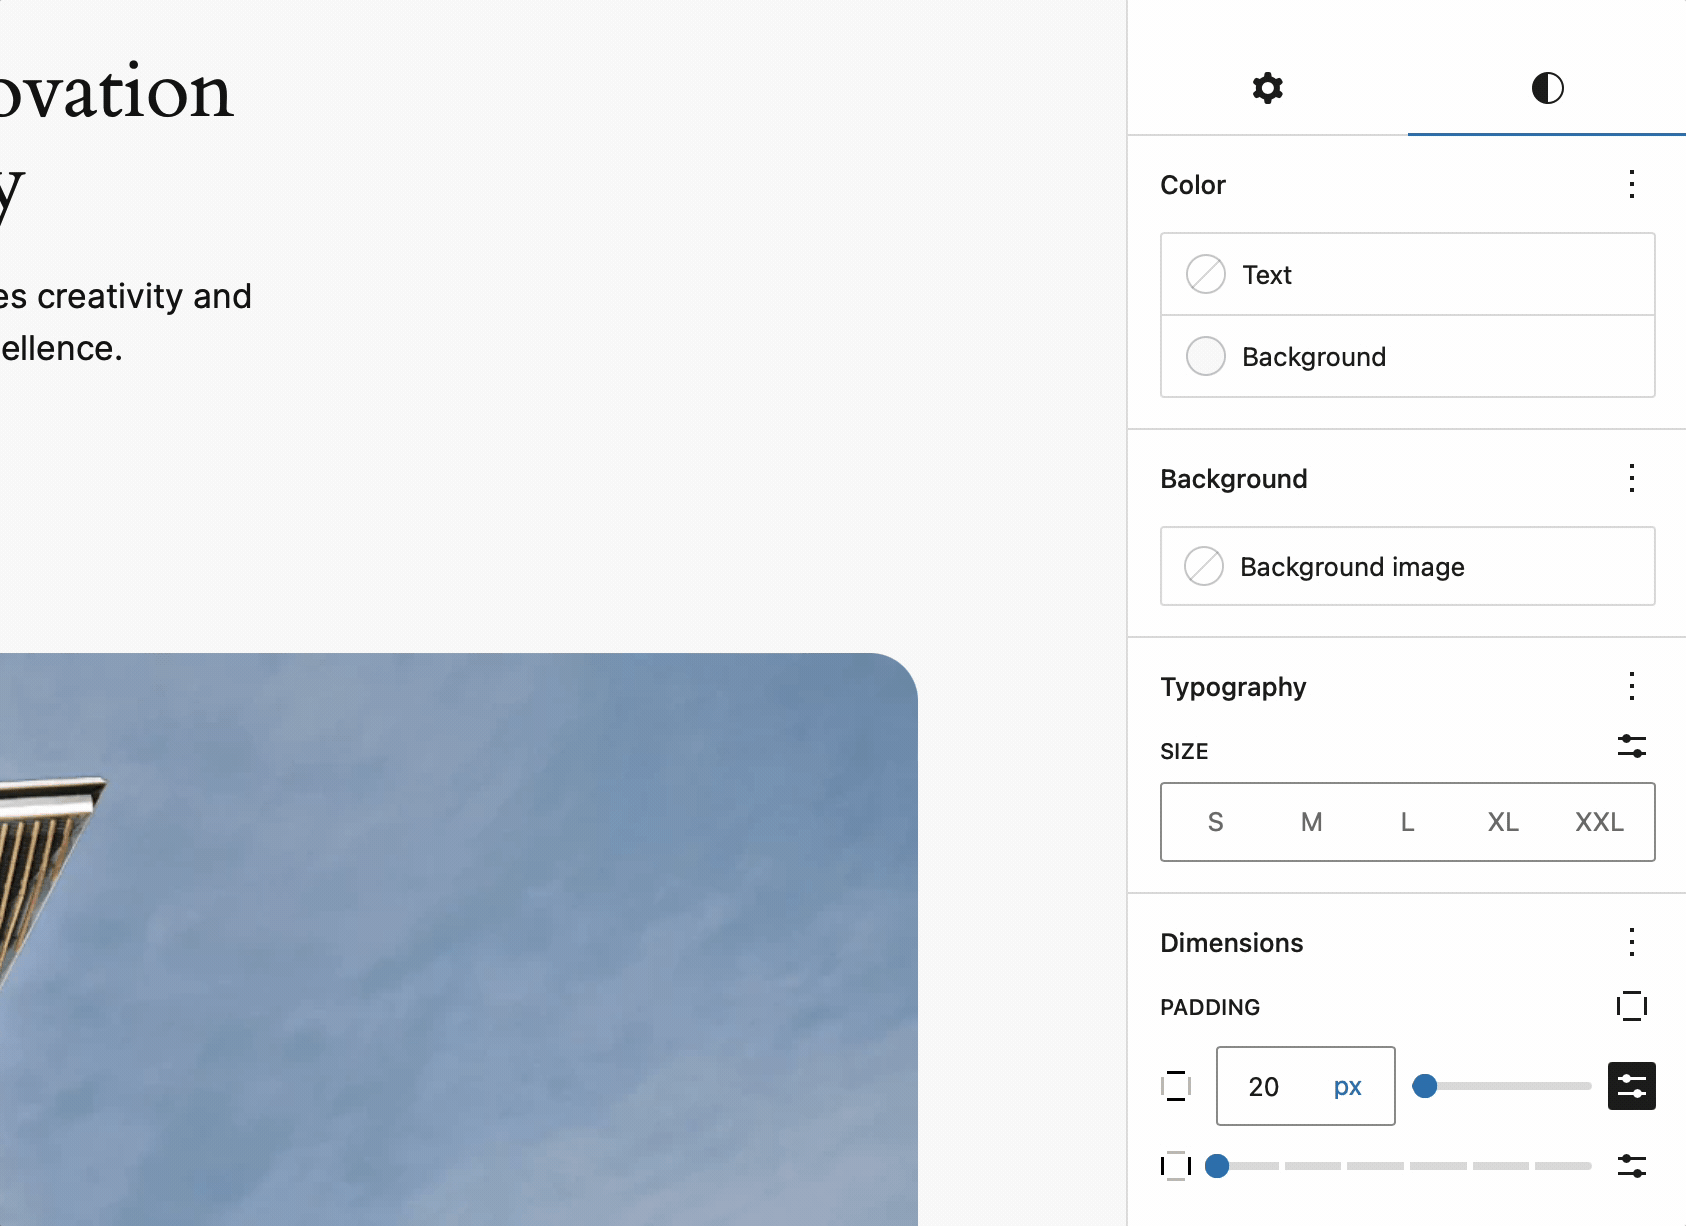 Using 3 dots to view more options